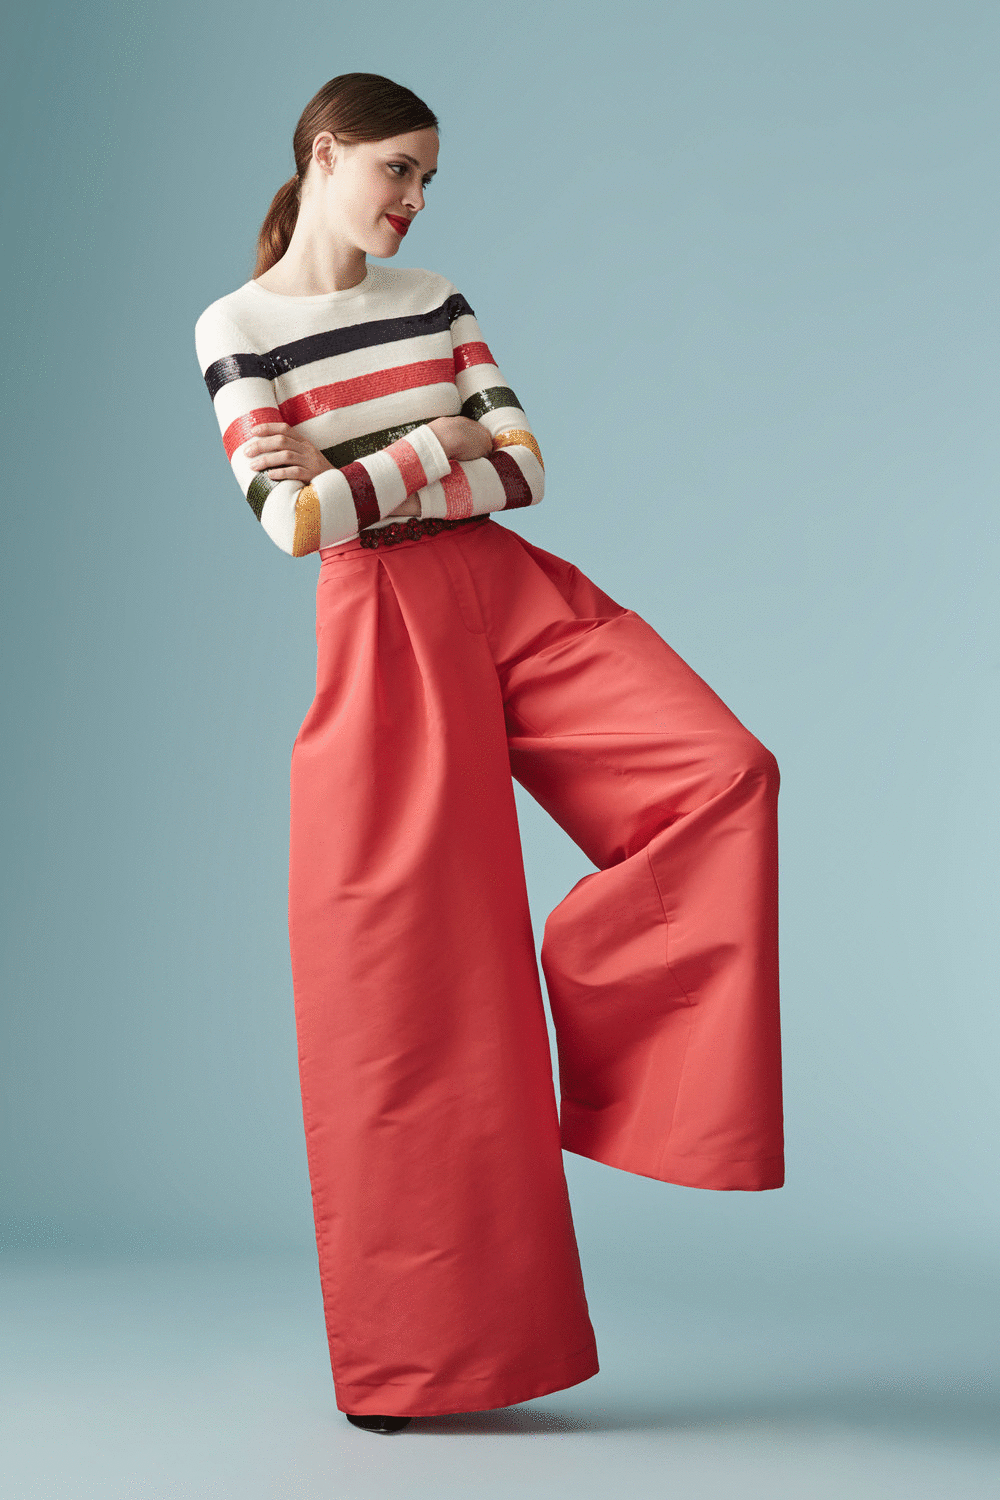 Massive pants in shades of bright red, blush pink, khaki, and navy.